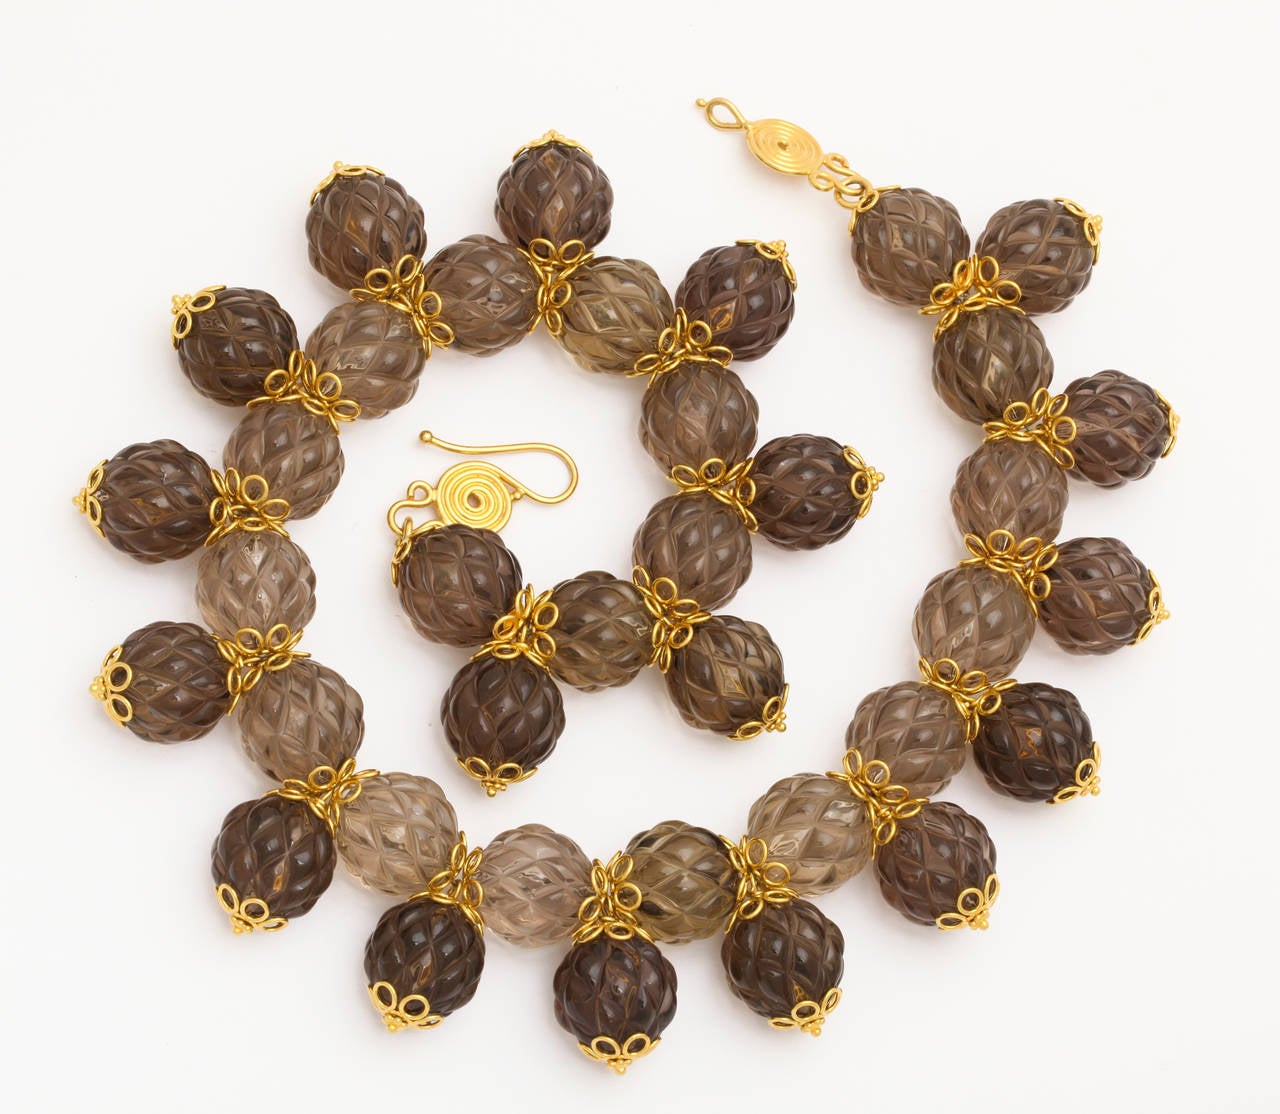 A necklace composed of carved smokey quartz beads, 18kt yellow gold flower caps, 18kt yellow gold headpins and an 18kt yellow gold clasp.
Length:18 inches
width: 1.50 inches